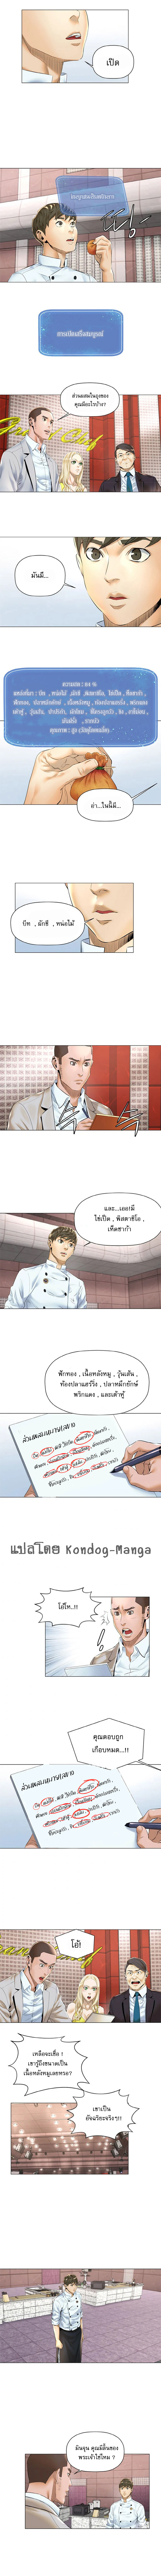 God of Cooking 13 (5)